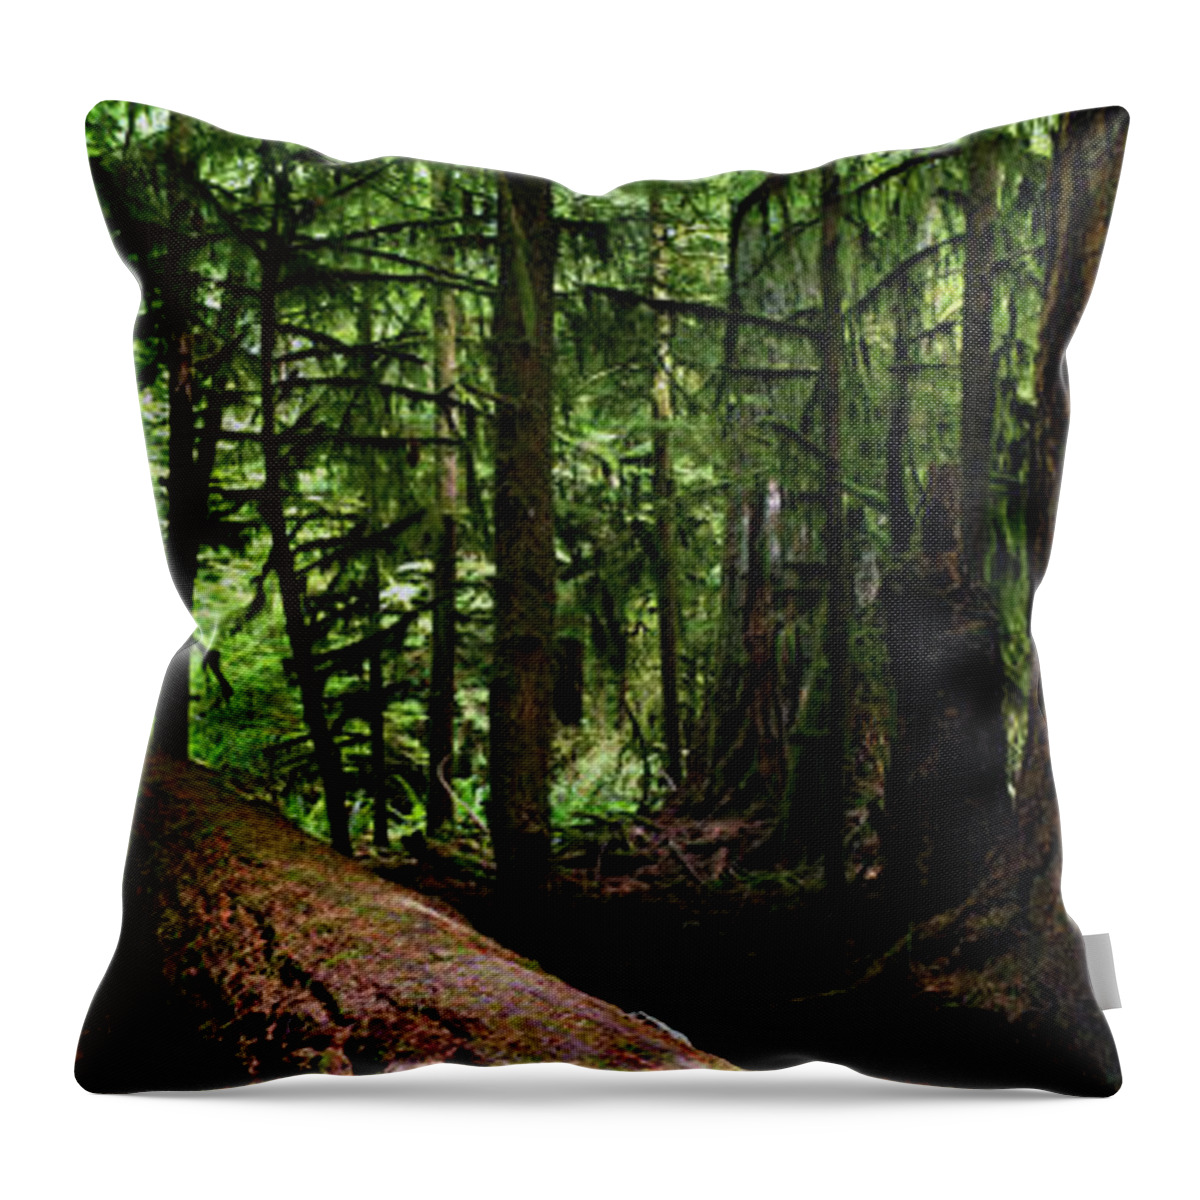 617 Throw Pillow featuring the photograph Giants - Canada Pacific Rim Vancouver Island Rain Forest by Sonny Ryse